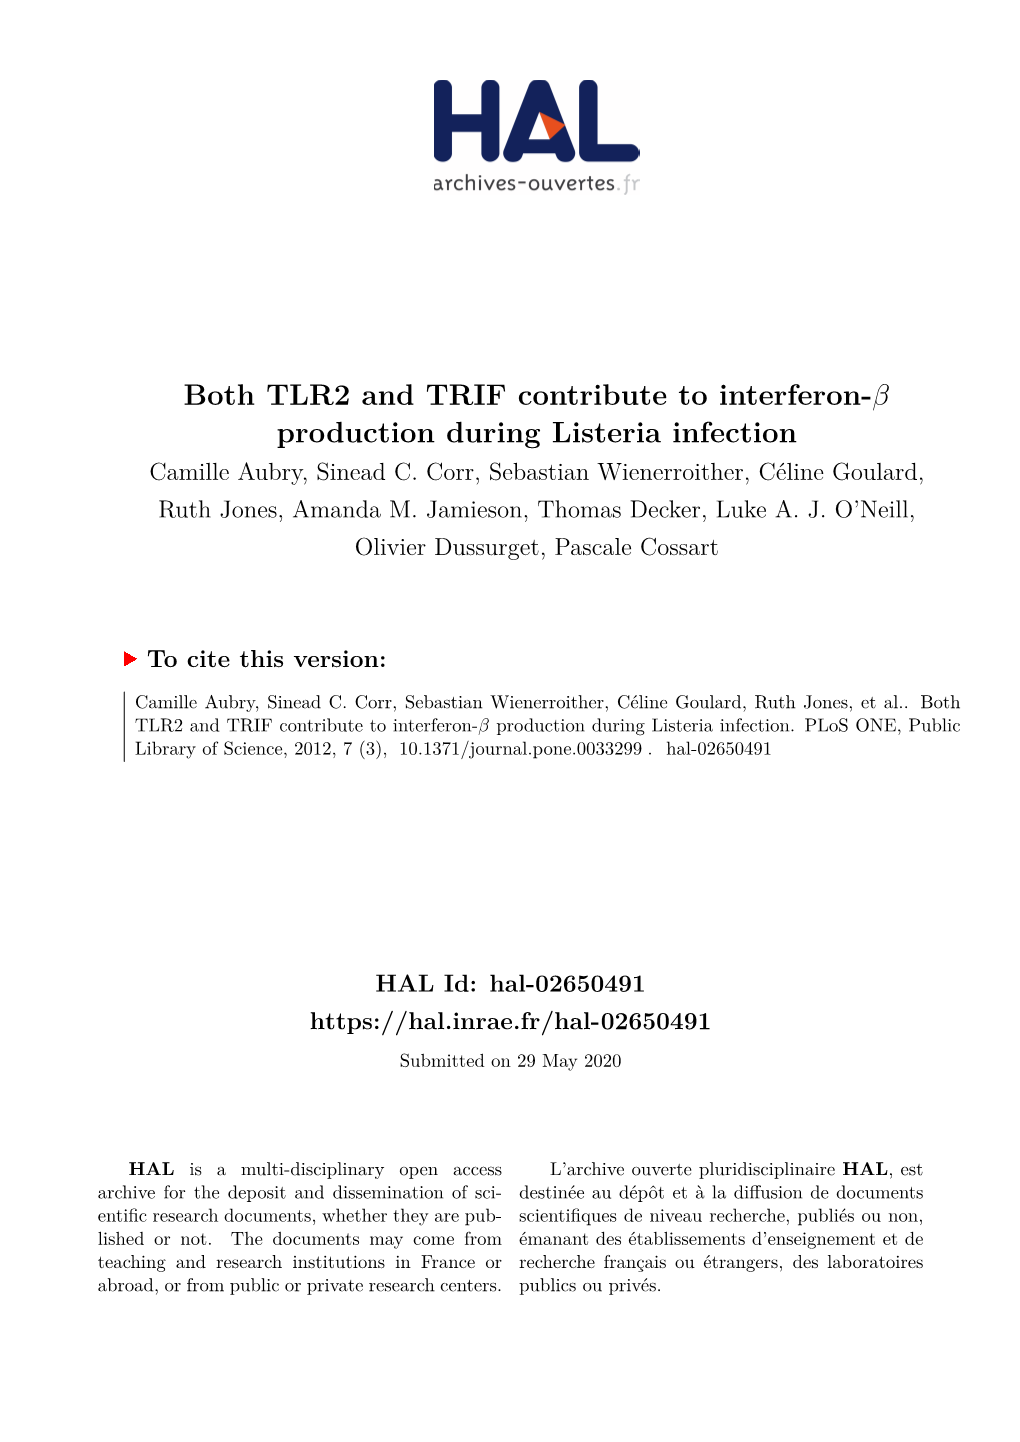 Both TLR2 and TRIF Contribute to Interferon- Production During